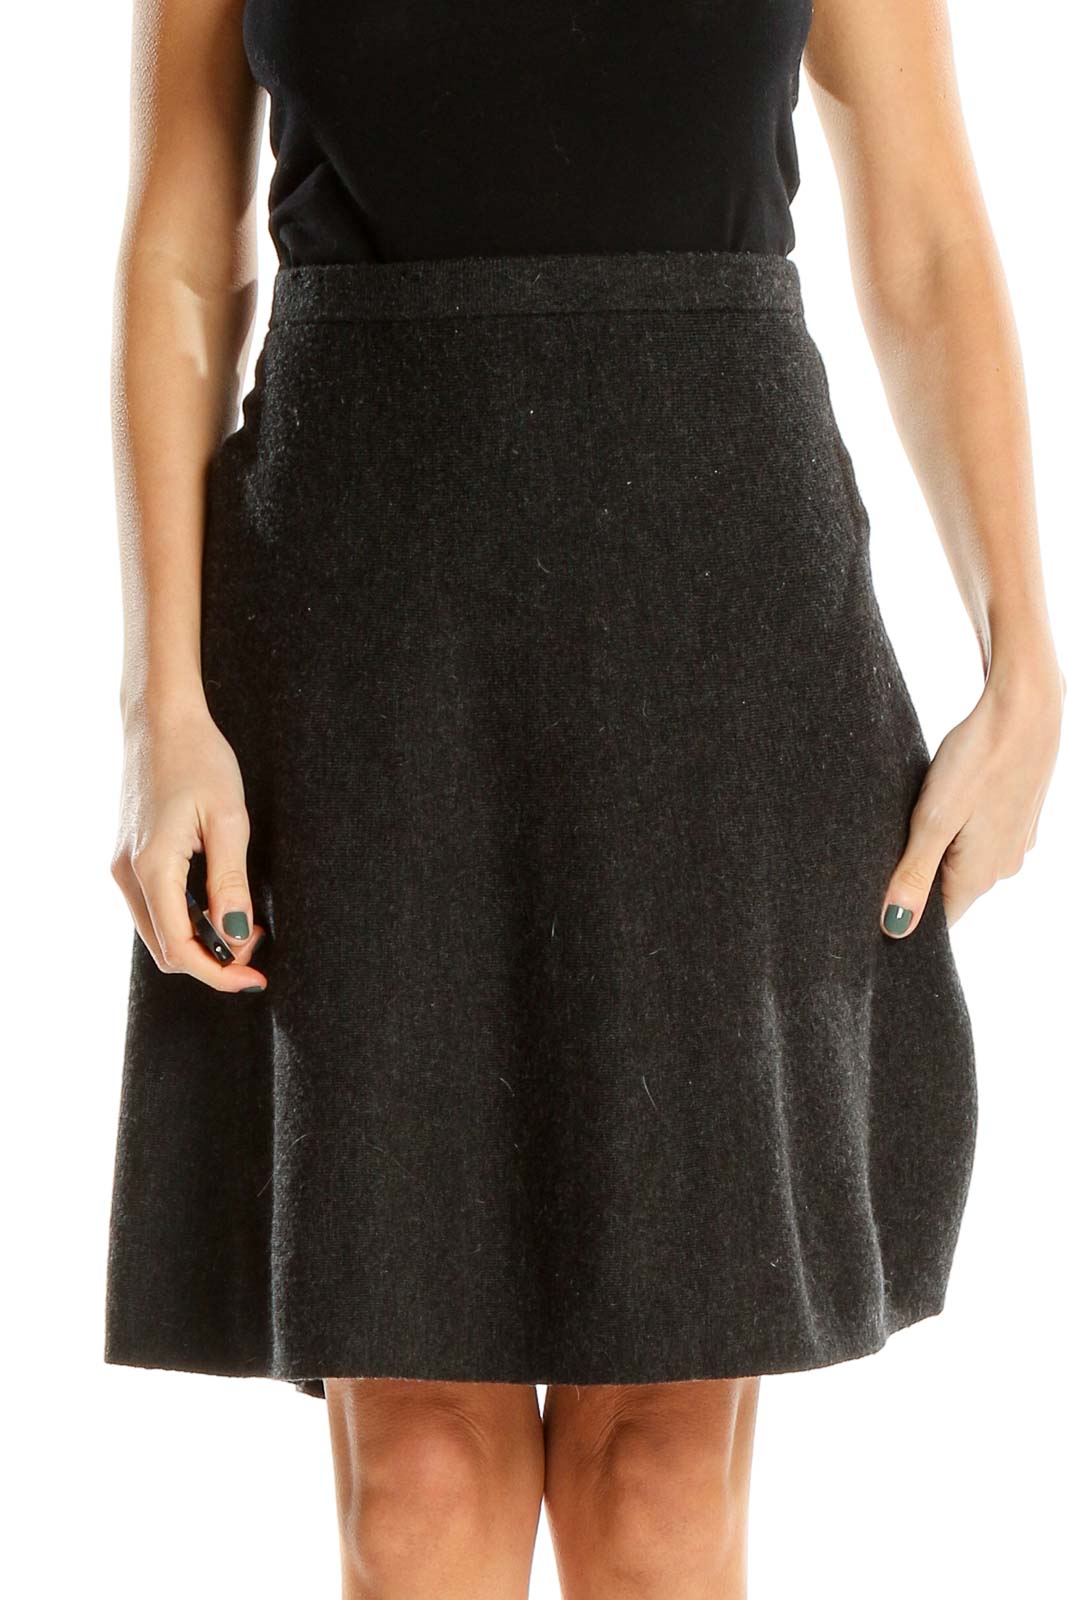 Gray Chic A-Line Skirt Front